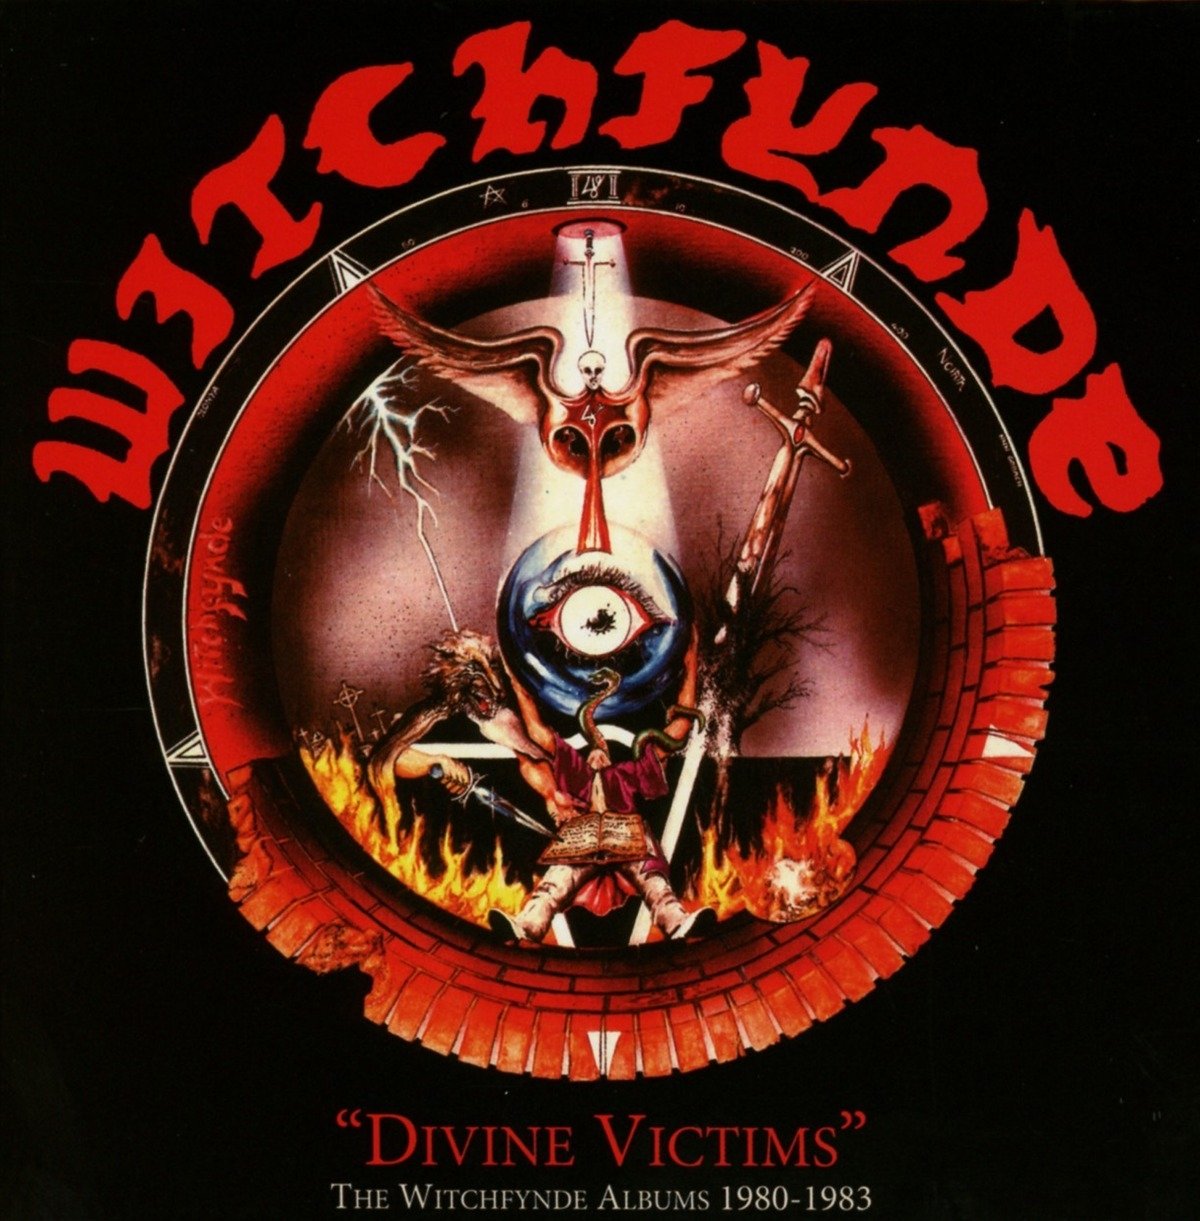 Witchfynde-Divine Victims The Witchfynde Albums 1980-1983-3CD-FLAC-2017-CATARACT